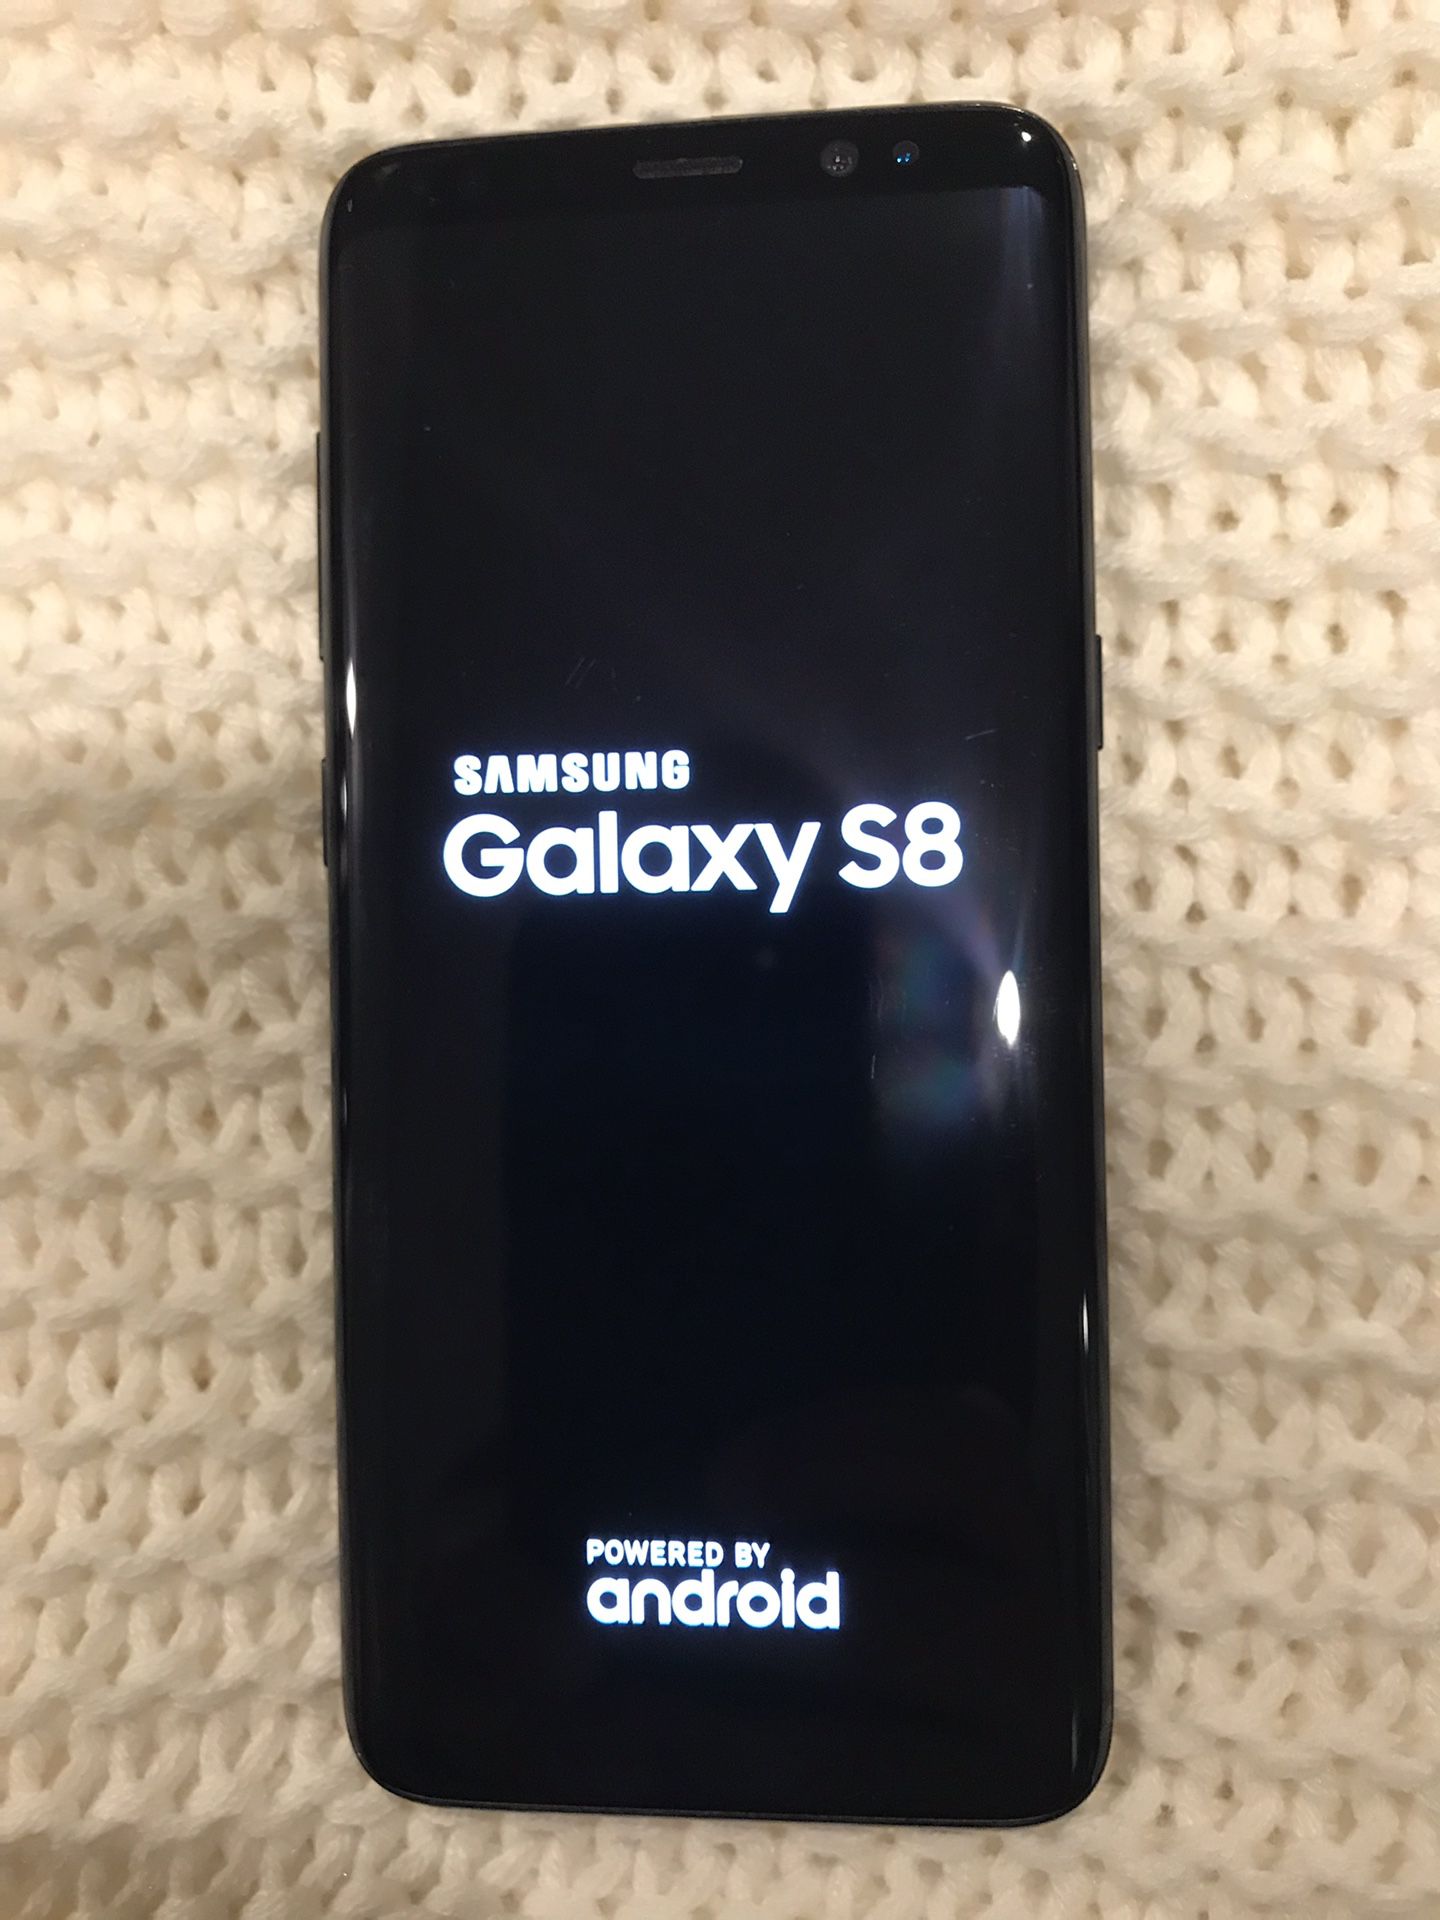 Samsung Galaxy S8 64GB (T-Mobile) UNLOCKED +USB CABLE +CHARGER $250 FIRM